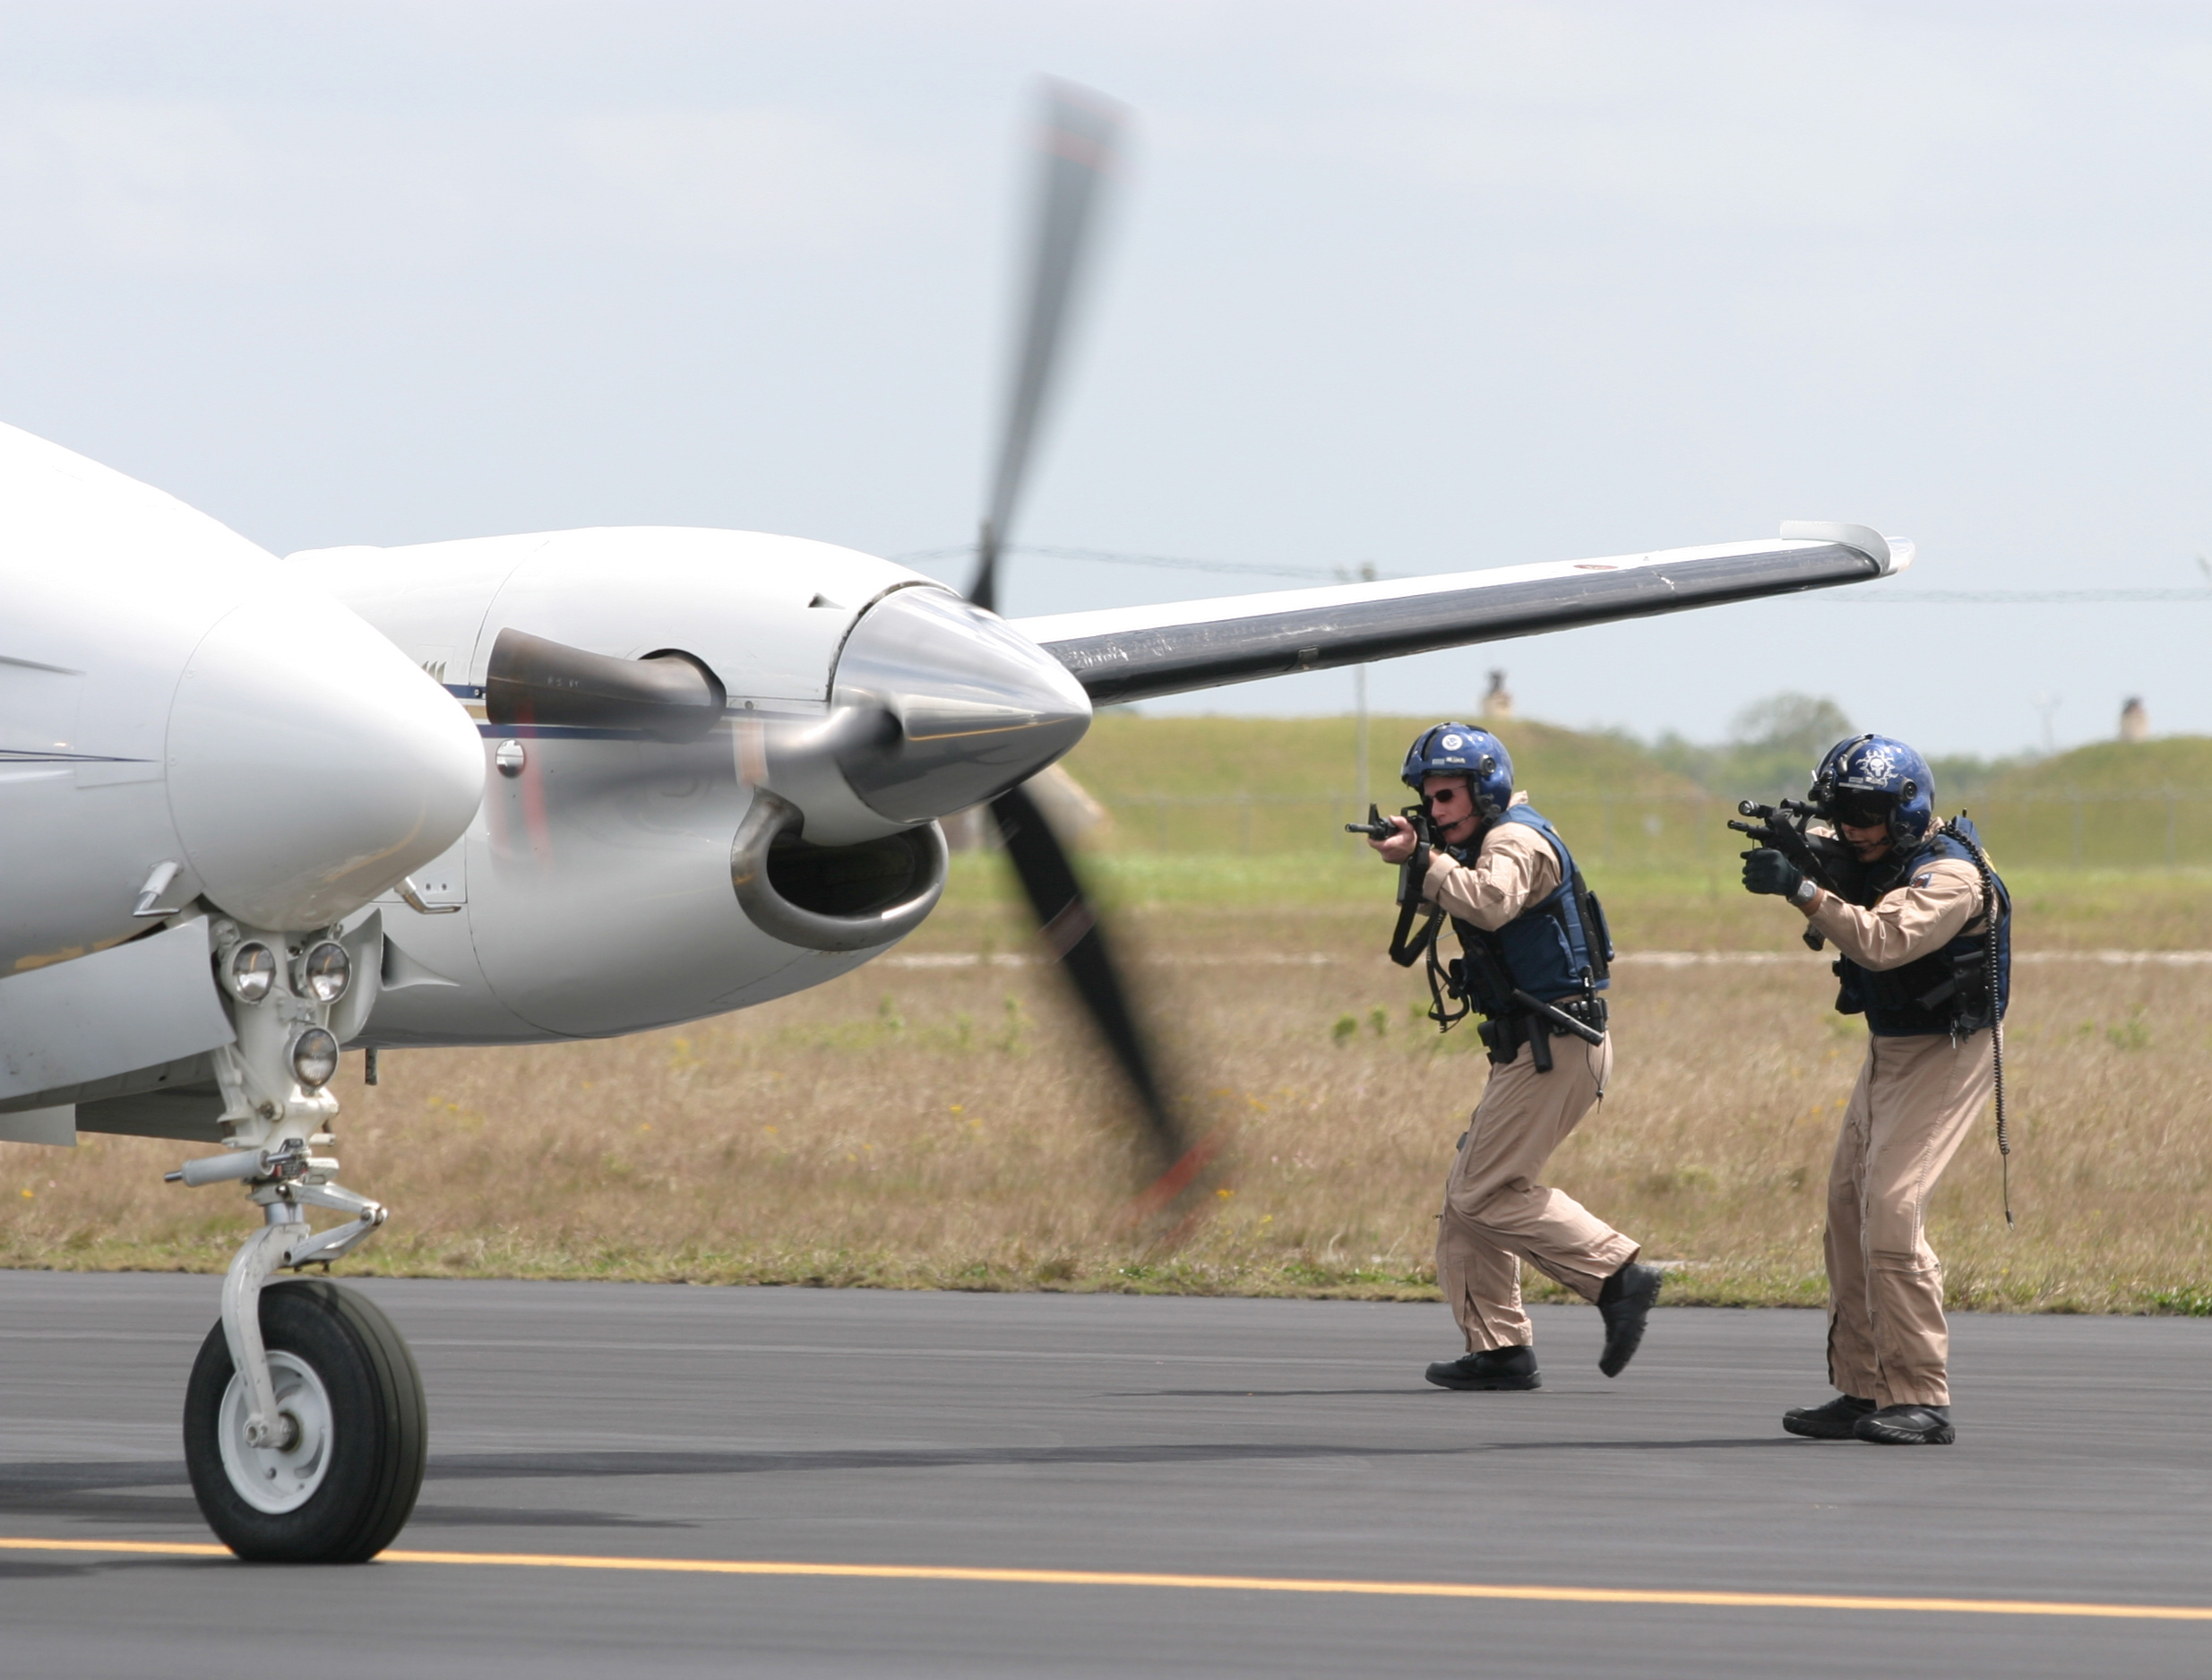 Two CBP Air Interdiction officers stop a suspicious small two engine plane on a runway.